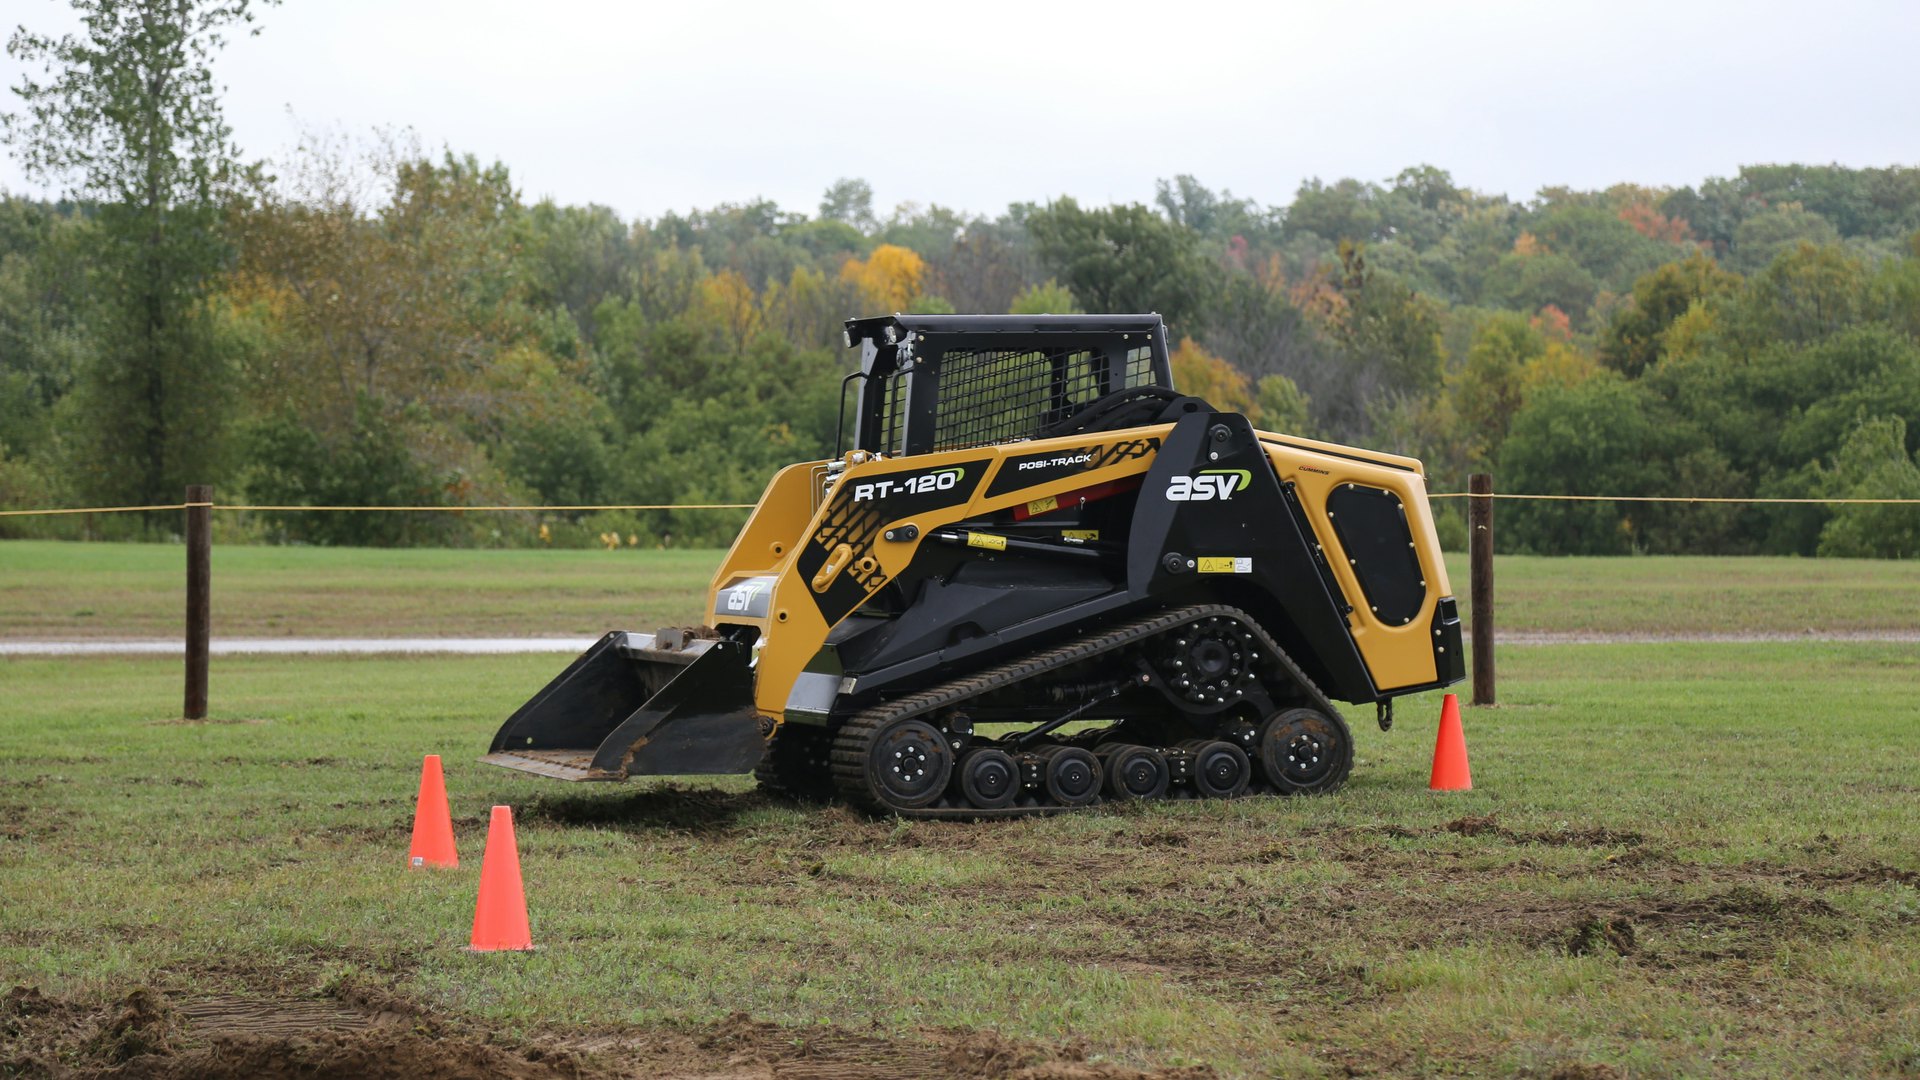 Asv Testing Remote Control Technology For Compact Track Loaders And Skid Steers Oem Off Highway